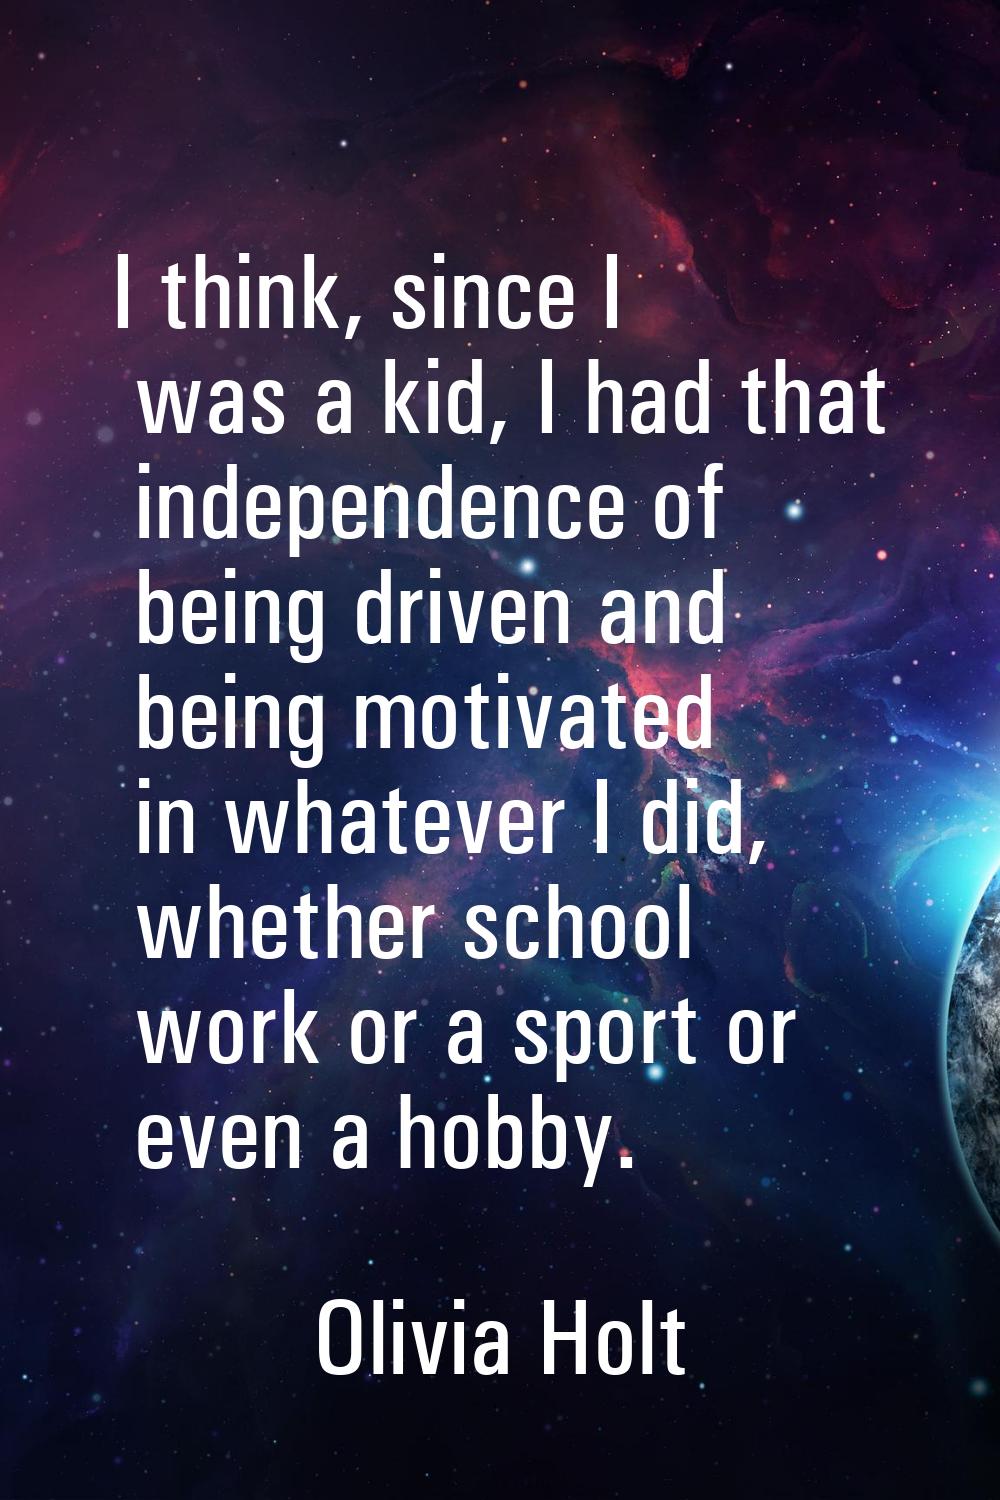 I think, since I was a kid, I had that independence of being driven and being motivated in whatever